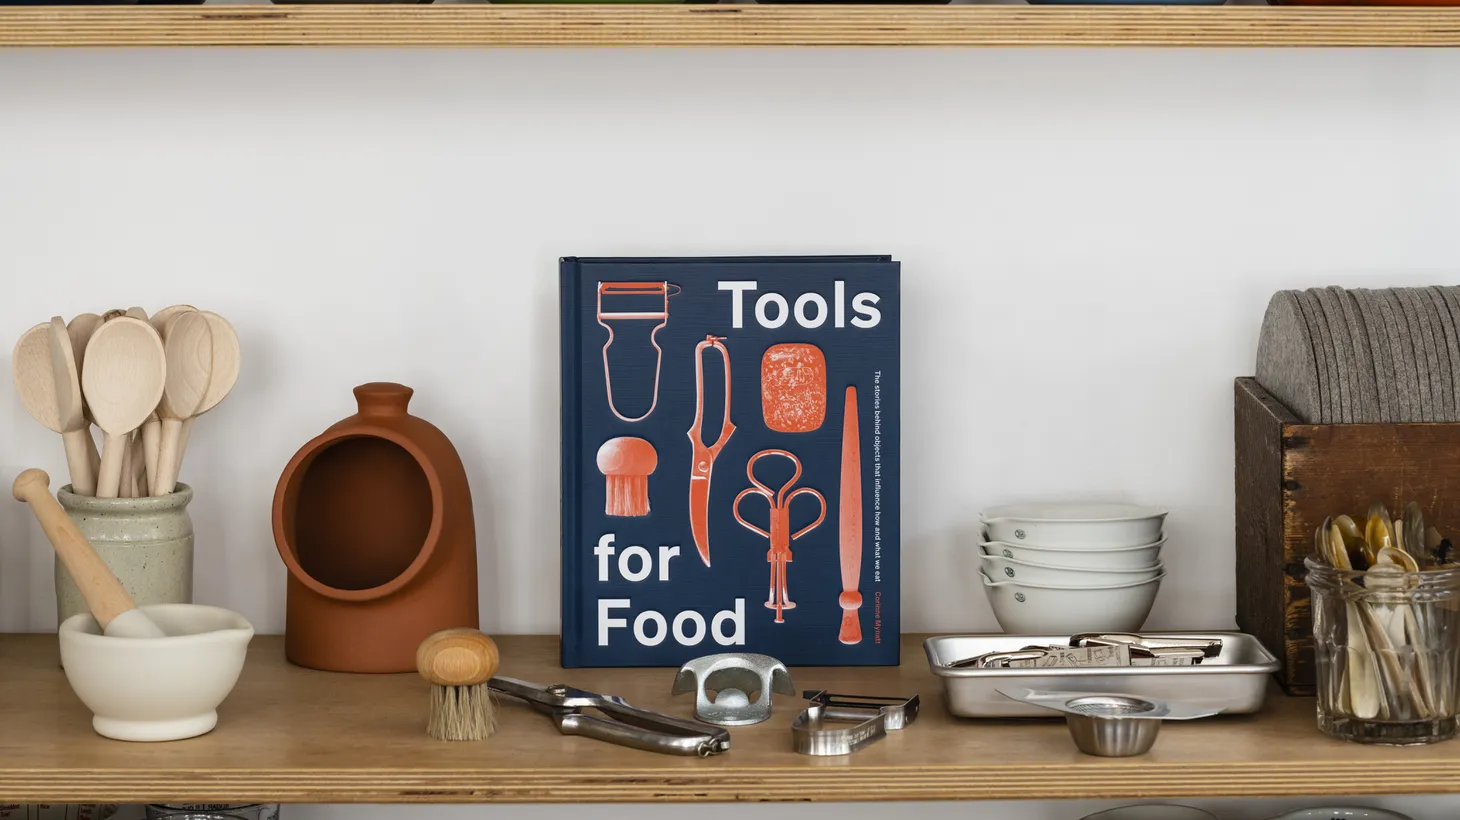 Cooking, history, and design are the tenets of “Tools for Food: The Objects that Influence How and What We Eat.”